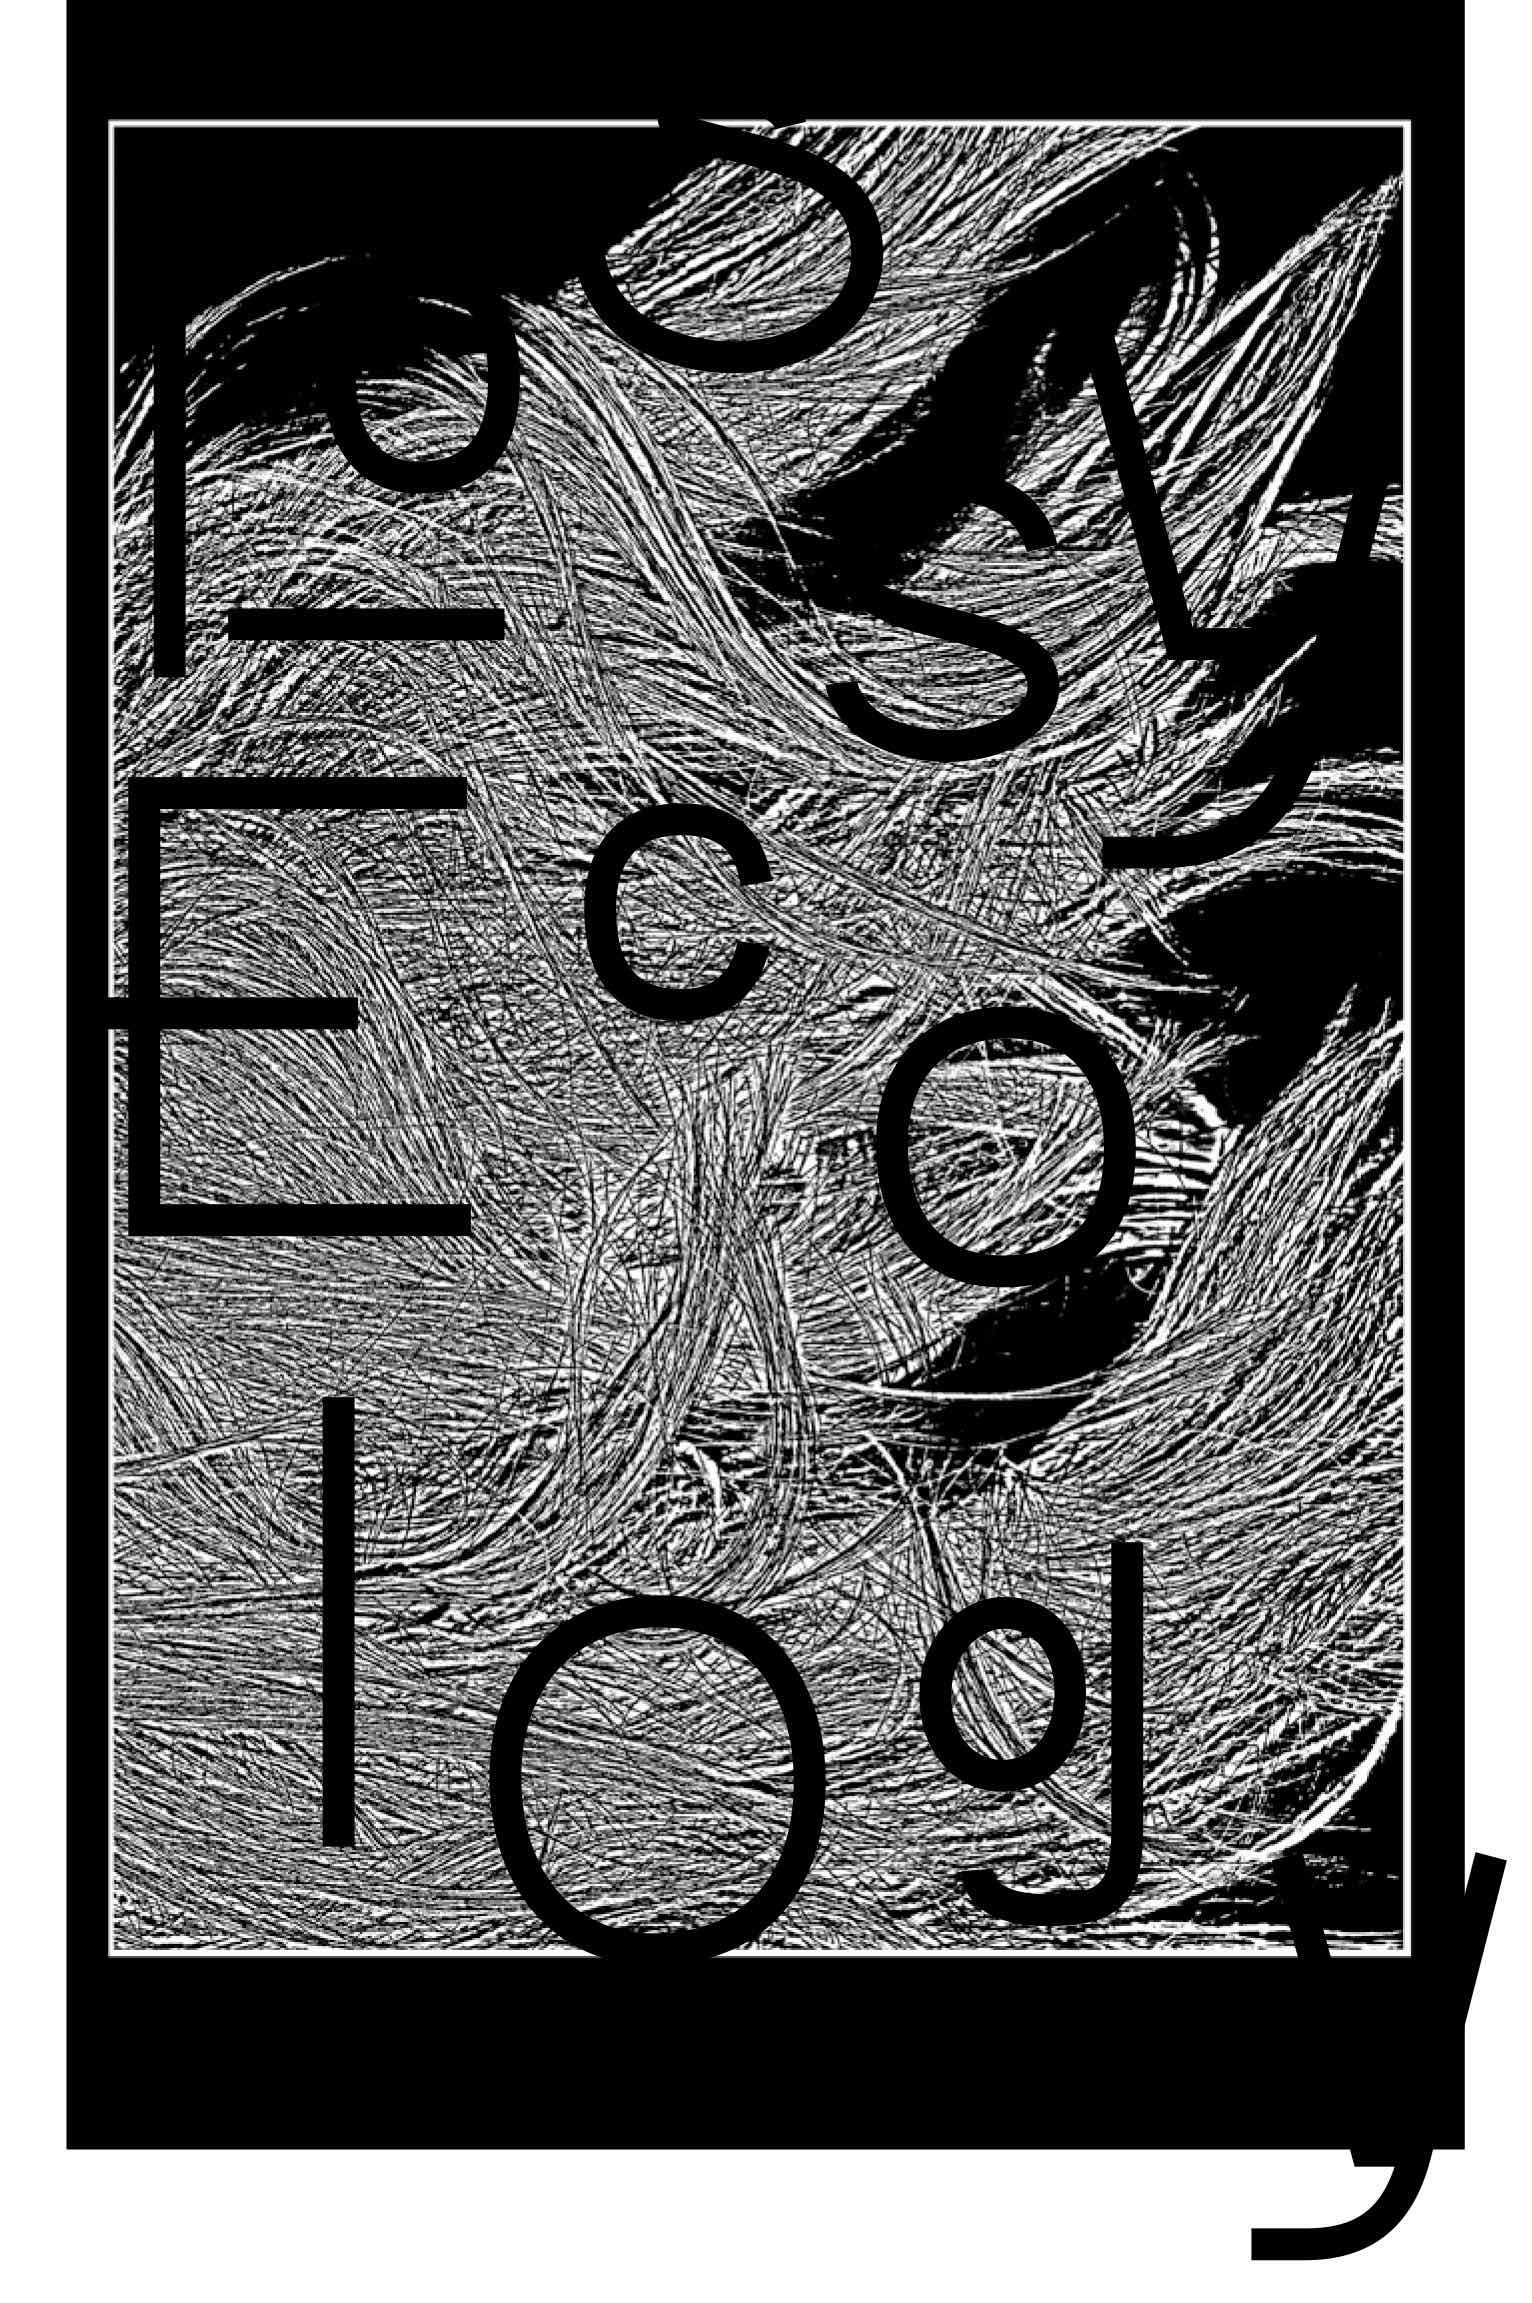 Lossy Ecology edited by Louisa Martin (Living Sculpture 2)